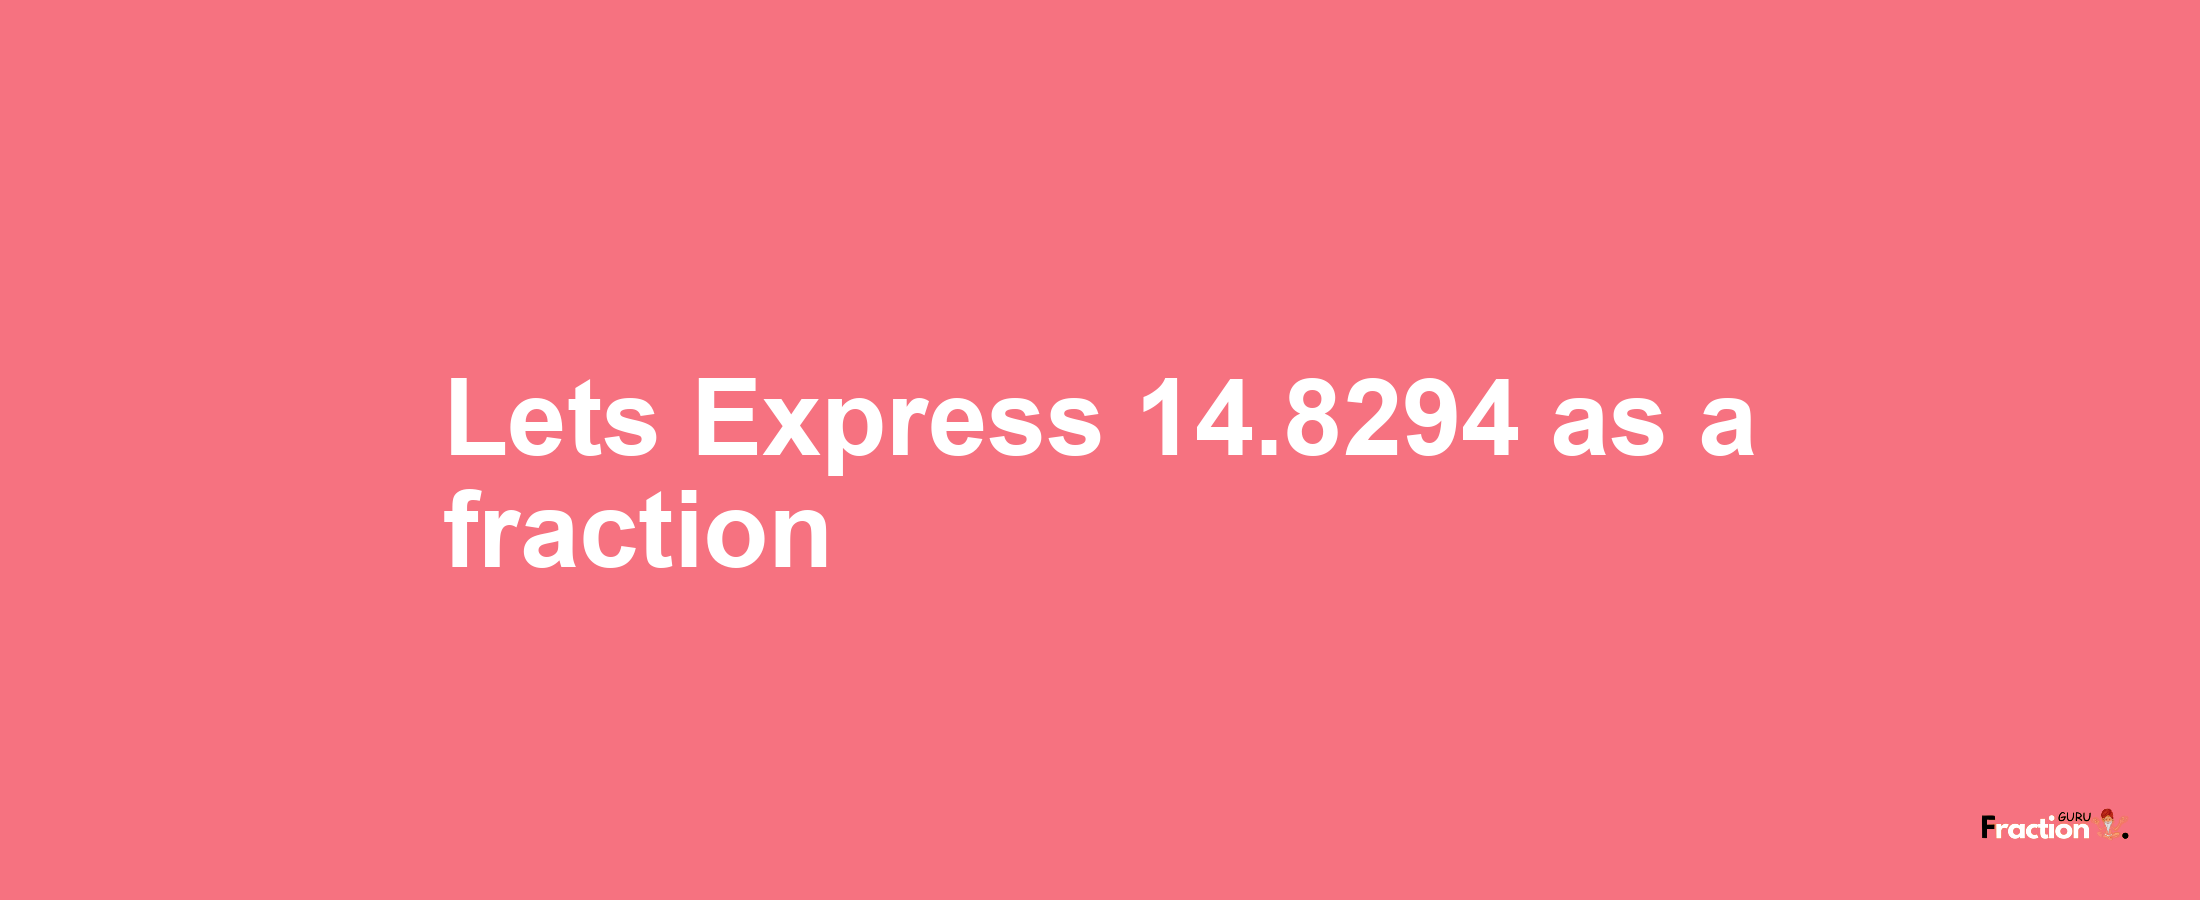 Lets Express 14.8294 as afraction